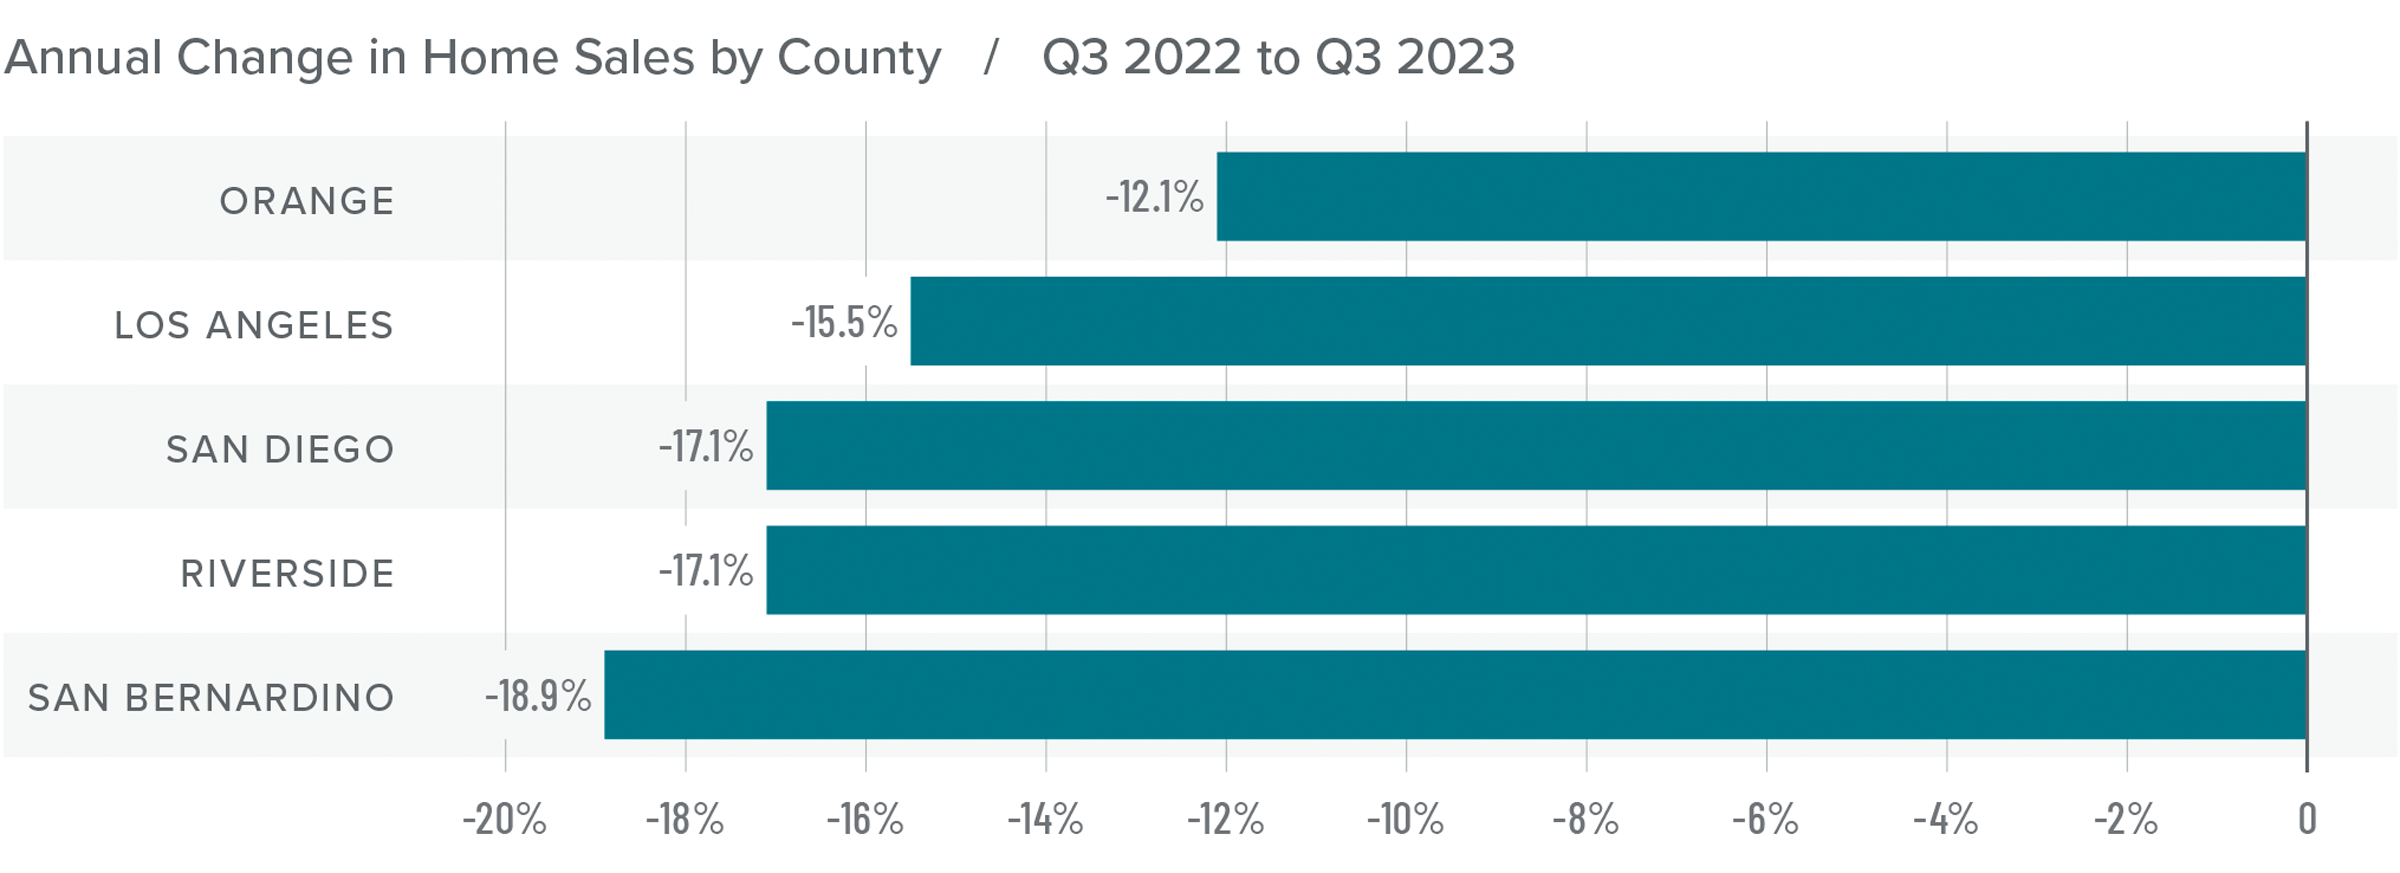 A graph showing the annual change in home sales by county in Southern California from Q3 2022 to Q3 2023. Orange County had the least drastic change at -12.1%, while San Bernardino had the largest change at -18.9%. San Diego and Riverside County are in the middle at -17.1 percent. 